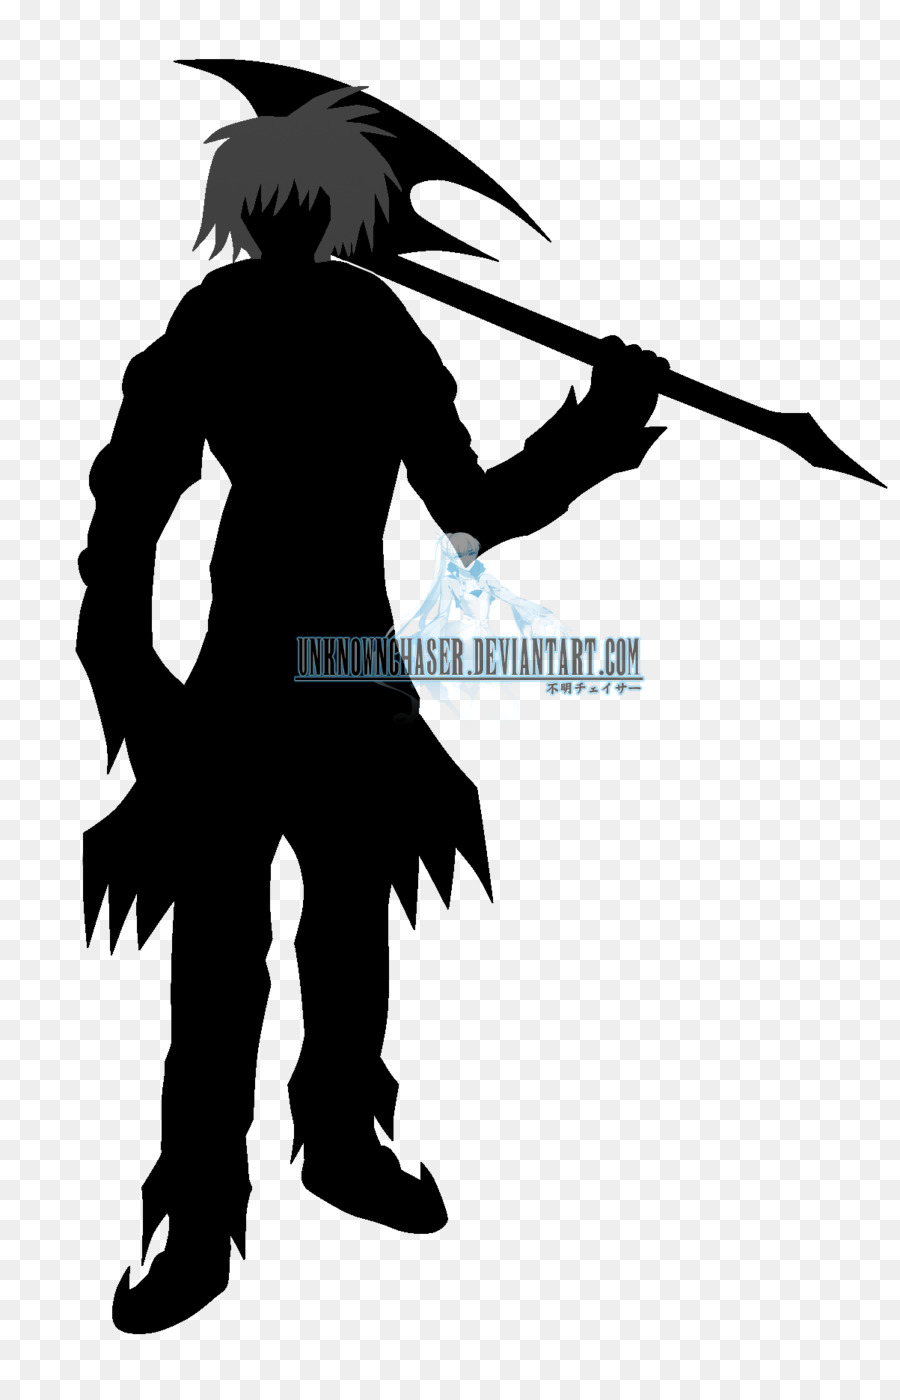 Black Silhouette White - Silhouette png download - 1203*1847 - Free Transparent Black png Download.